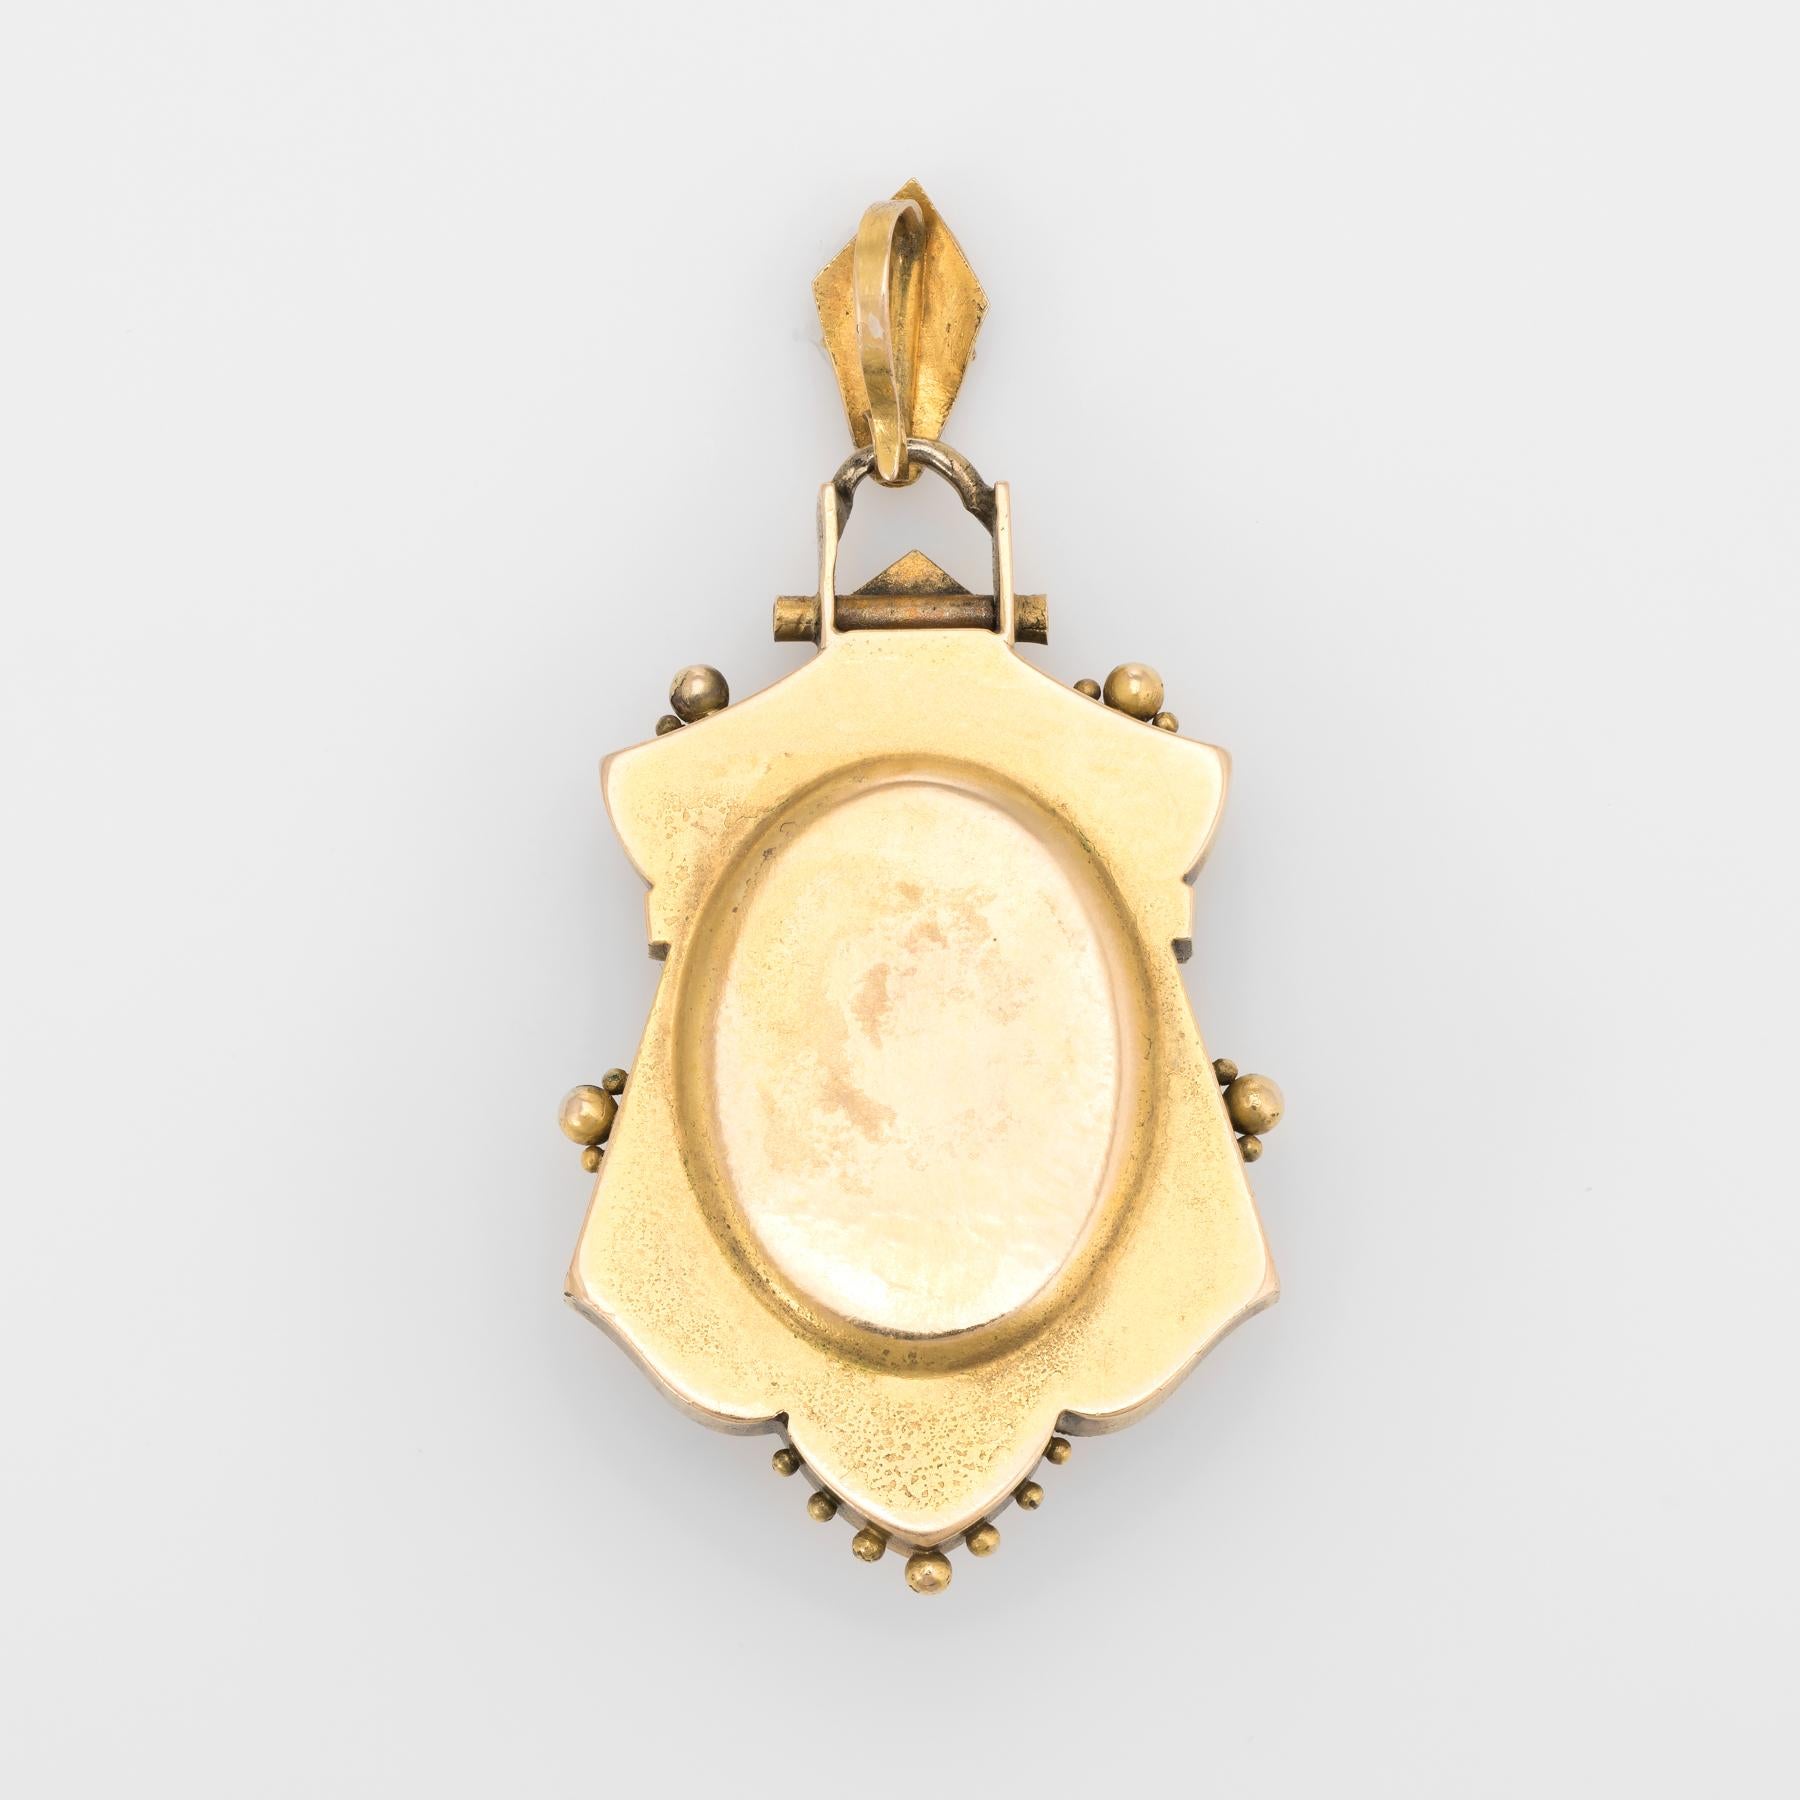 Finely detailed antique Victorian era pendant (circa 1870s to 1880s), crafted in 14 karat yellow  gold.  

Five 1.5mm seed pearls are set into the mount. Note: slight color variance to the pearls from wear and age.  

The stylish pendant features a